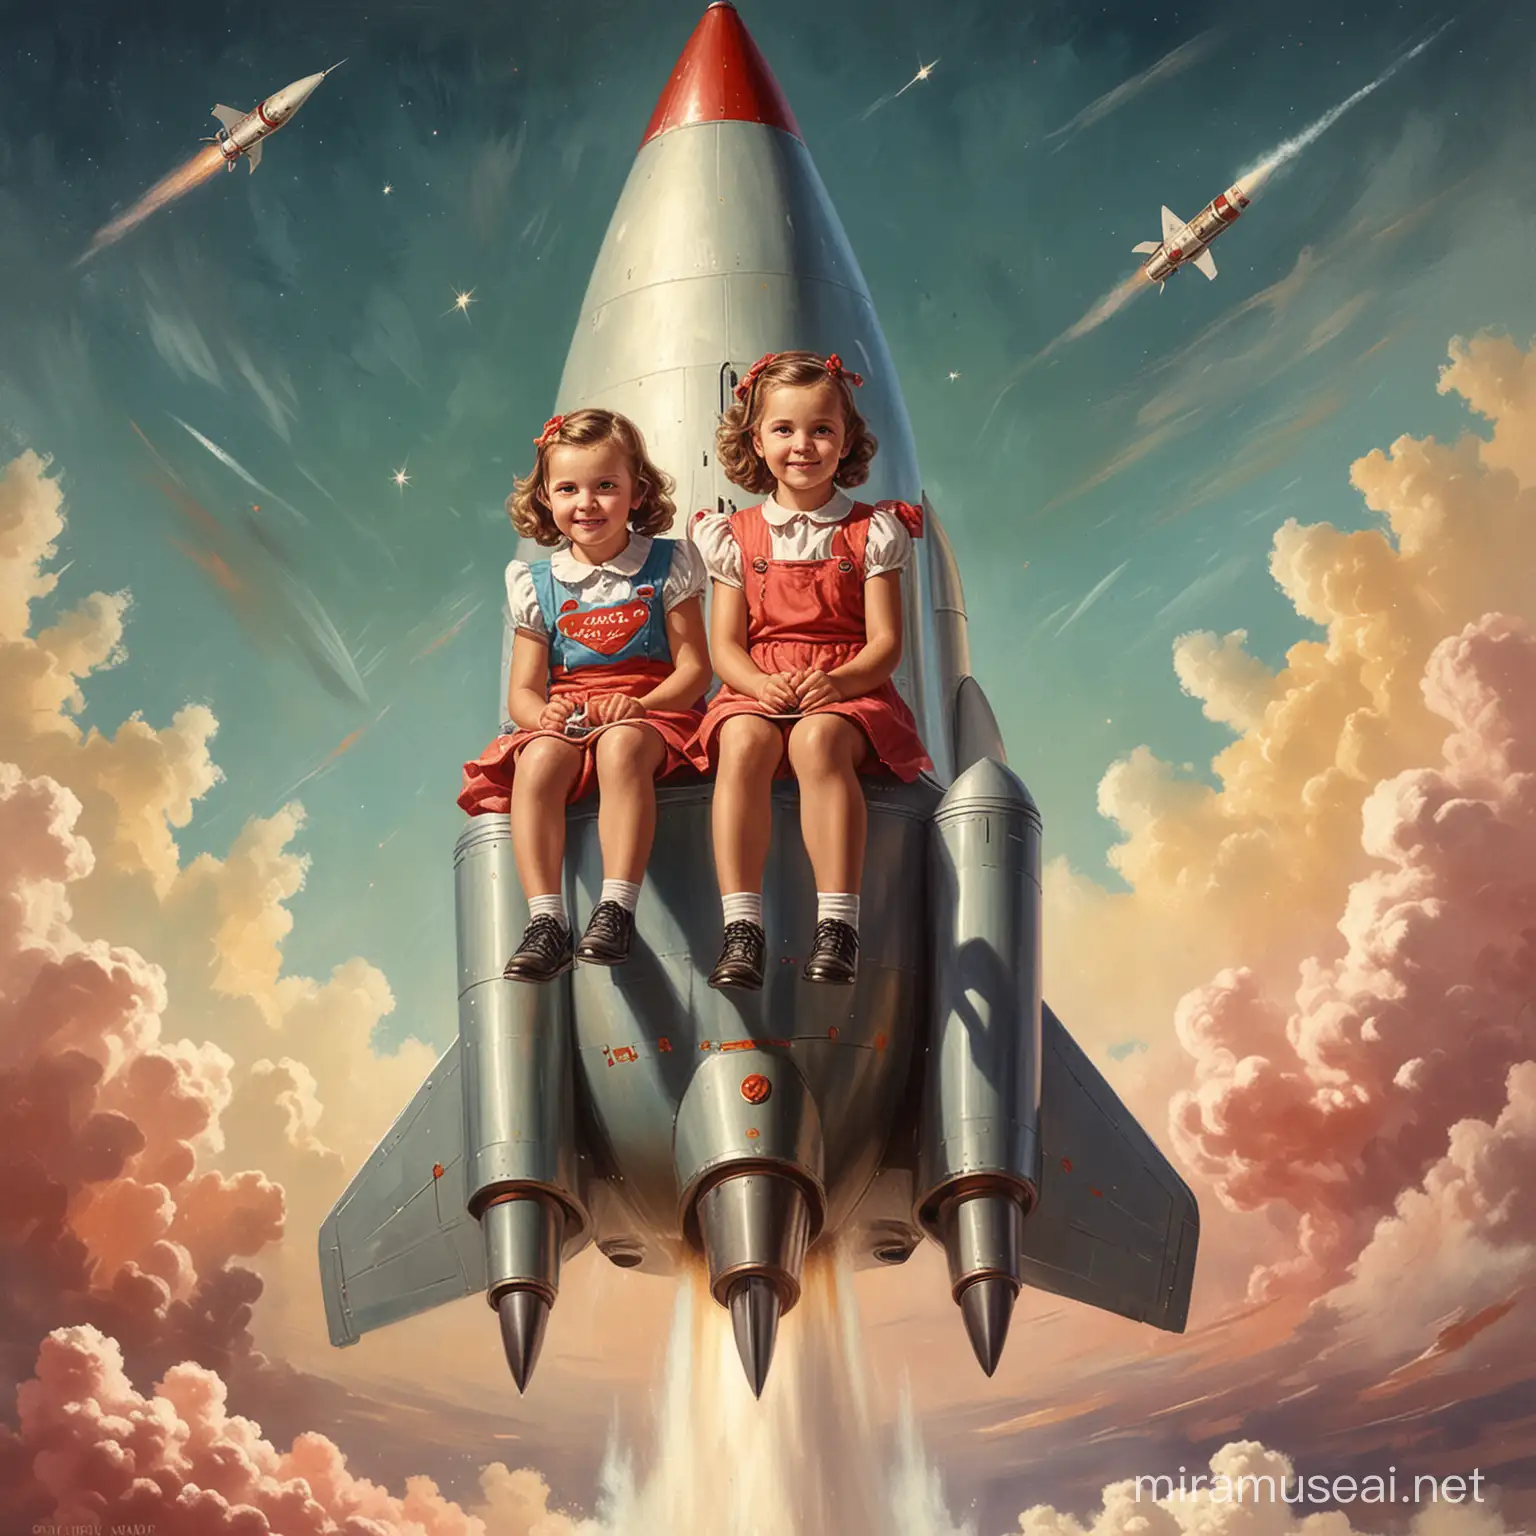 Vintage Retro Painting of Two Girls on a Love Rocket 1940s